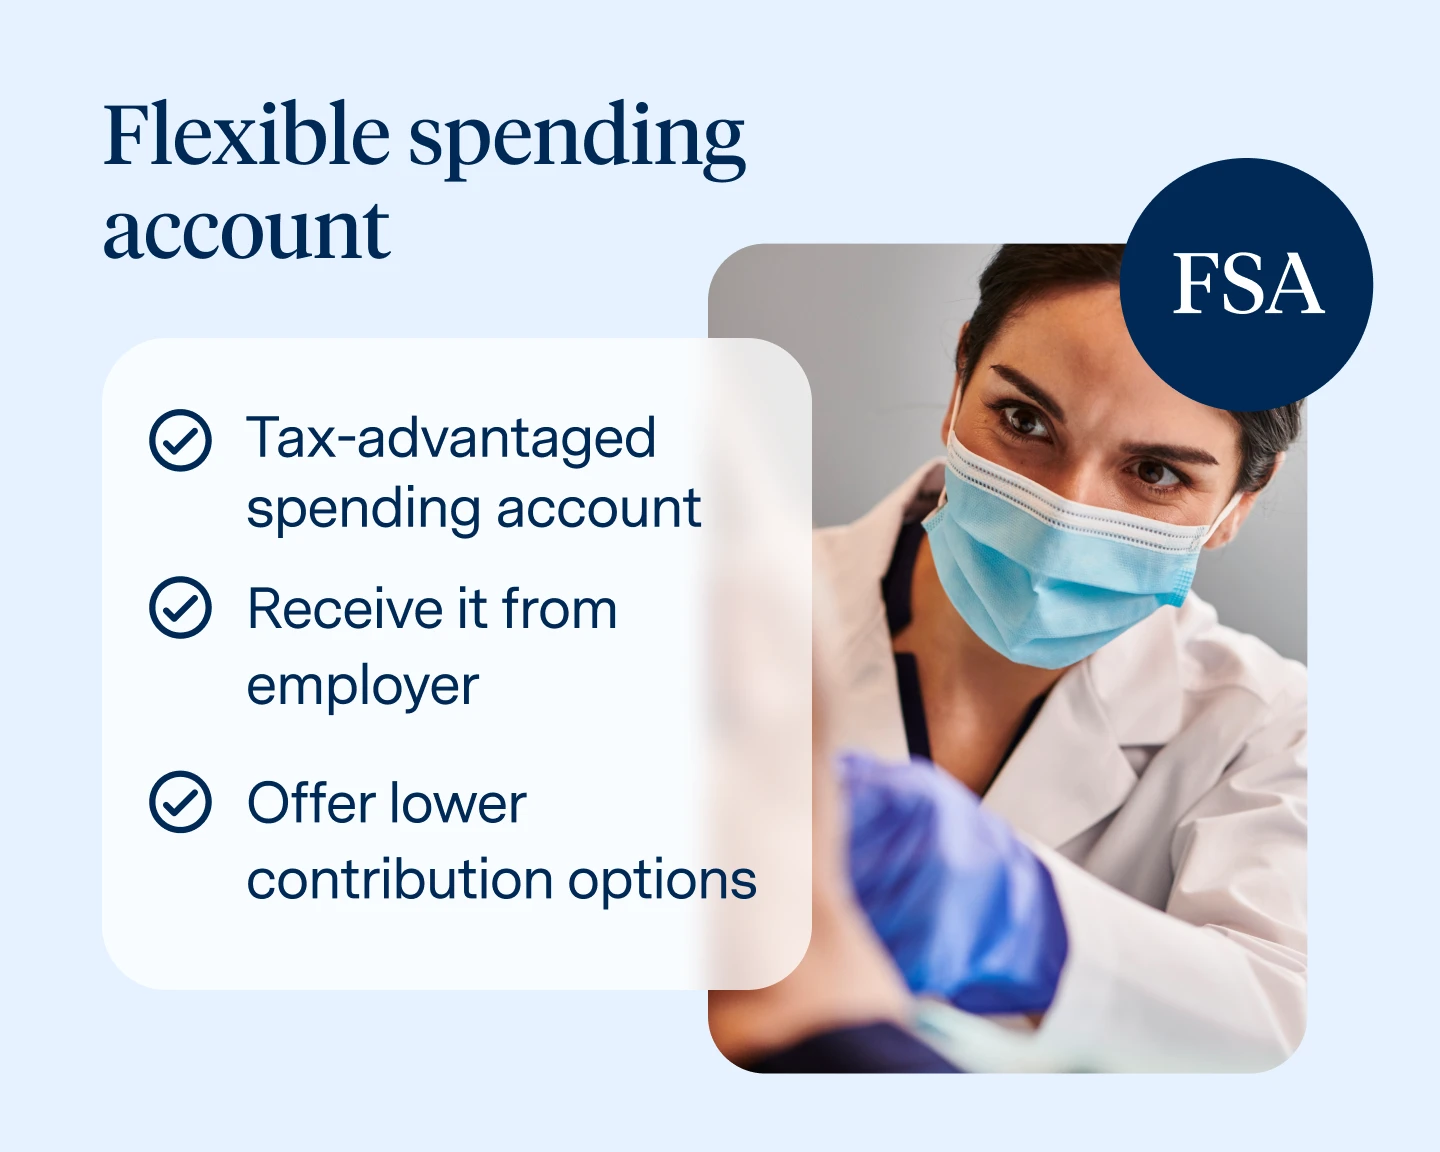 FSA (Flexible Spending Account) funds can help you save on taxes while providing financial flexibility for medical and dental expenses. FSA can also contribute to your overall wellness by reducing the financial burden of healthcare.